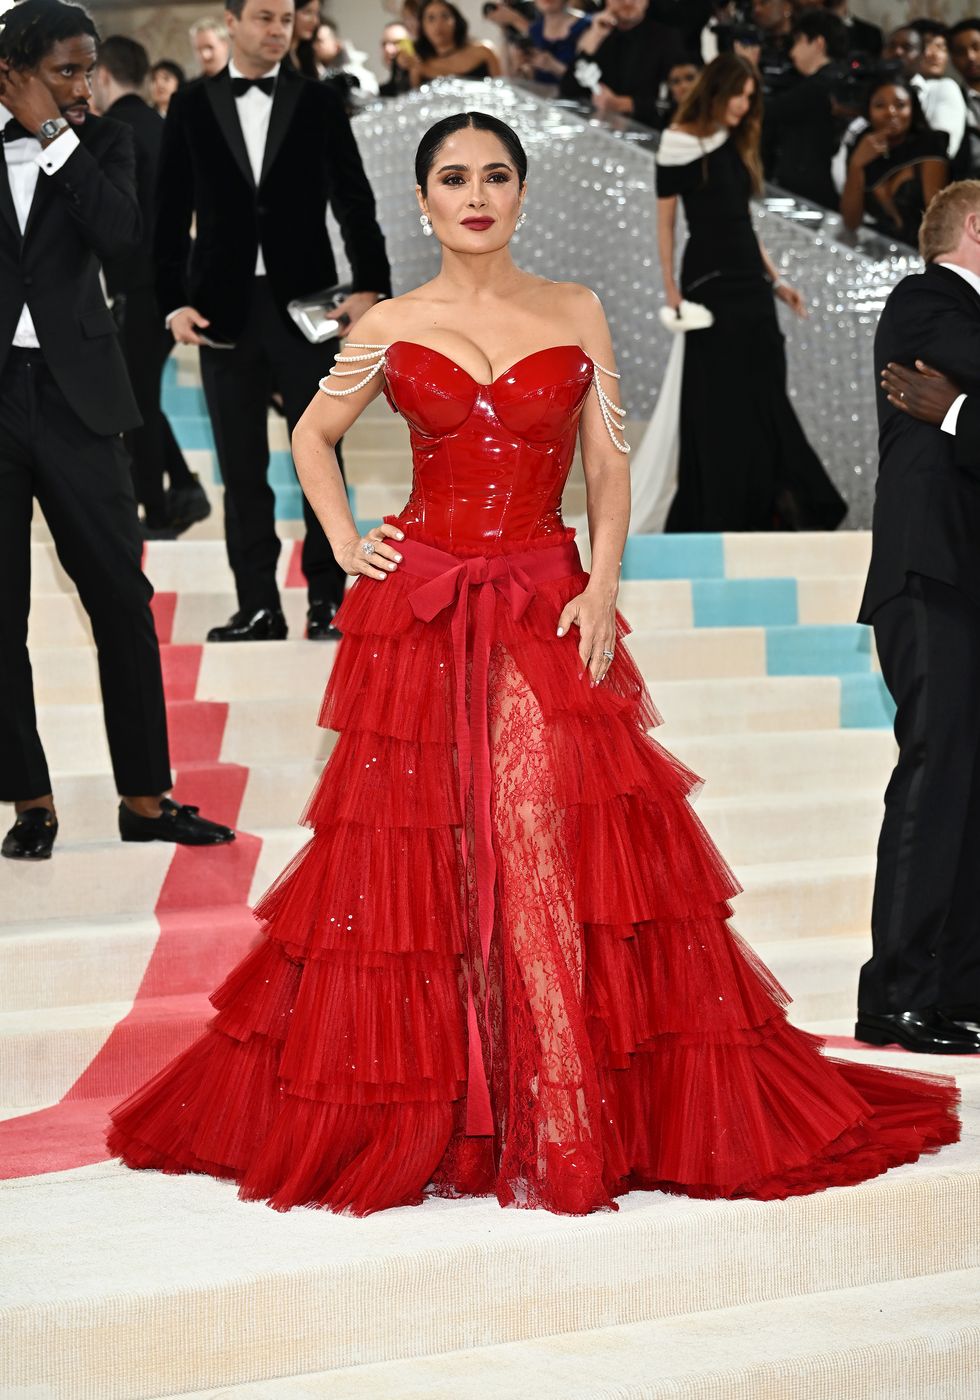 Salma Hayek Wore Red Bustier Gown With Sheer Lace Leg Slit to 2023 ...